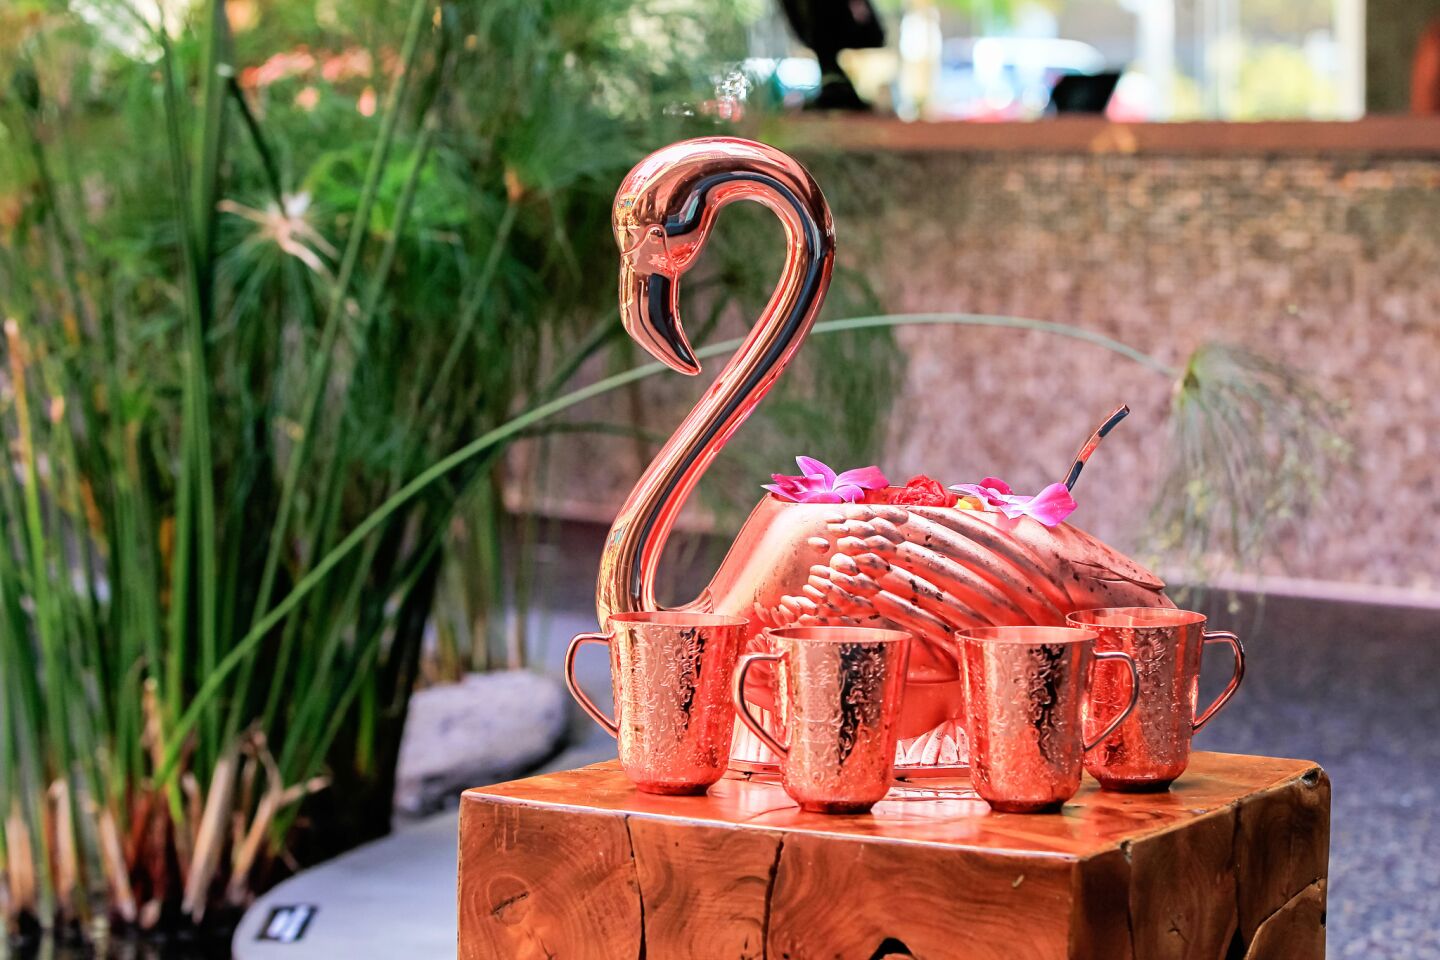 One of the popular items on insideOUT's cocktail menu: the Flamboyant Flamingo drink: Elyx vodka, St. Germain, rosé wine, lemon juice and soda. At $55, it serves three to five guests.